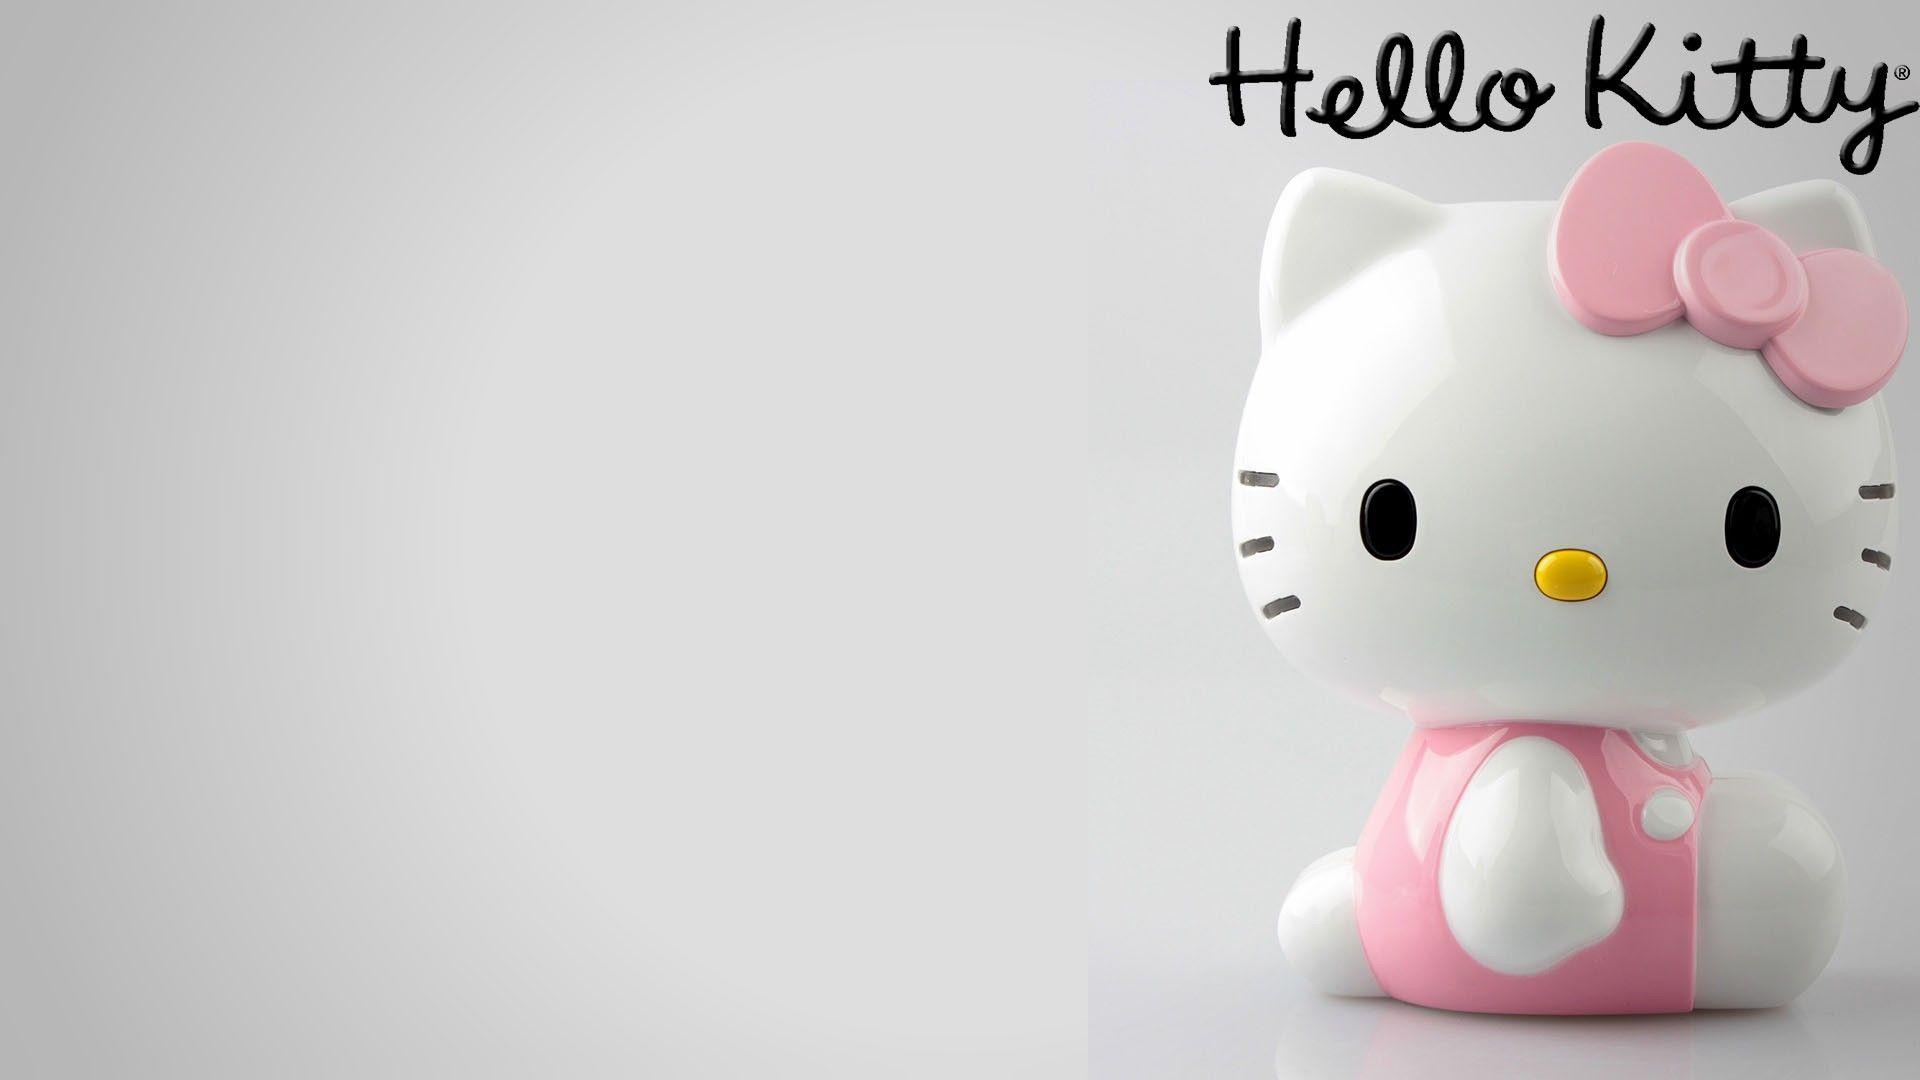 3d Kitty Wallpapers Top Free 3d Kitty Backgrounds Wallpaperaccess